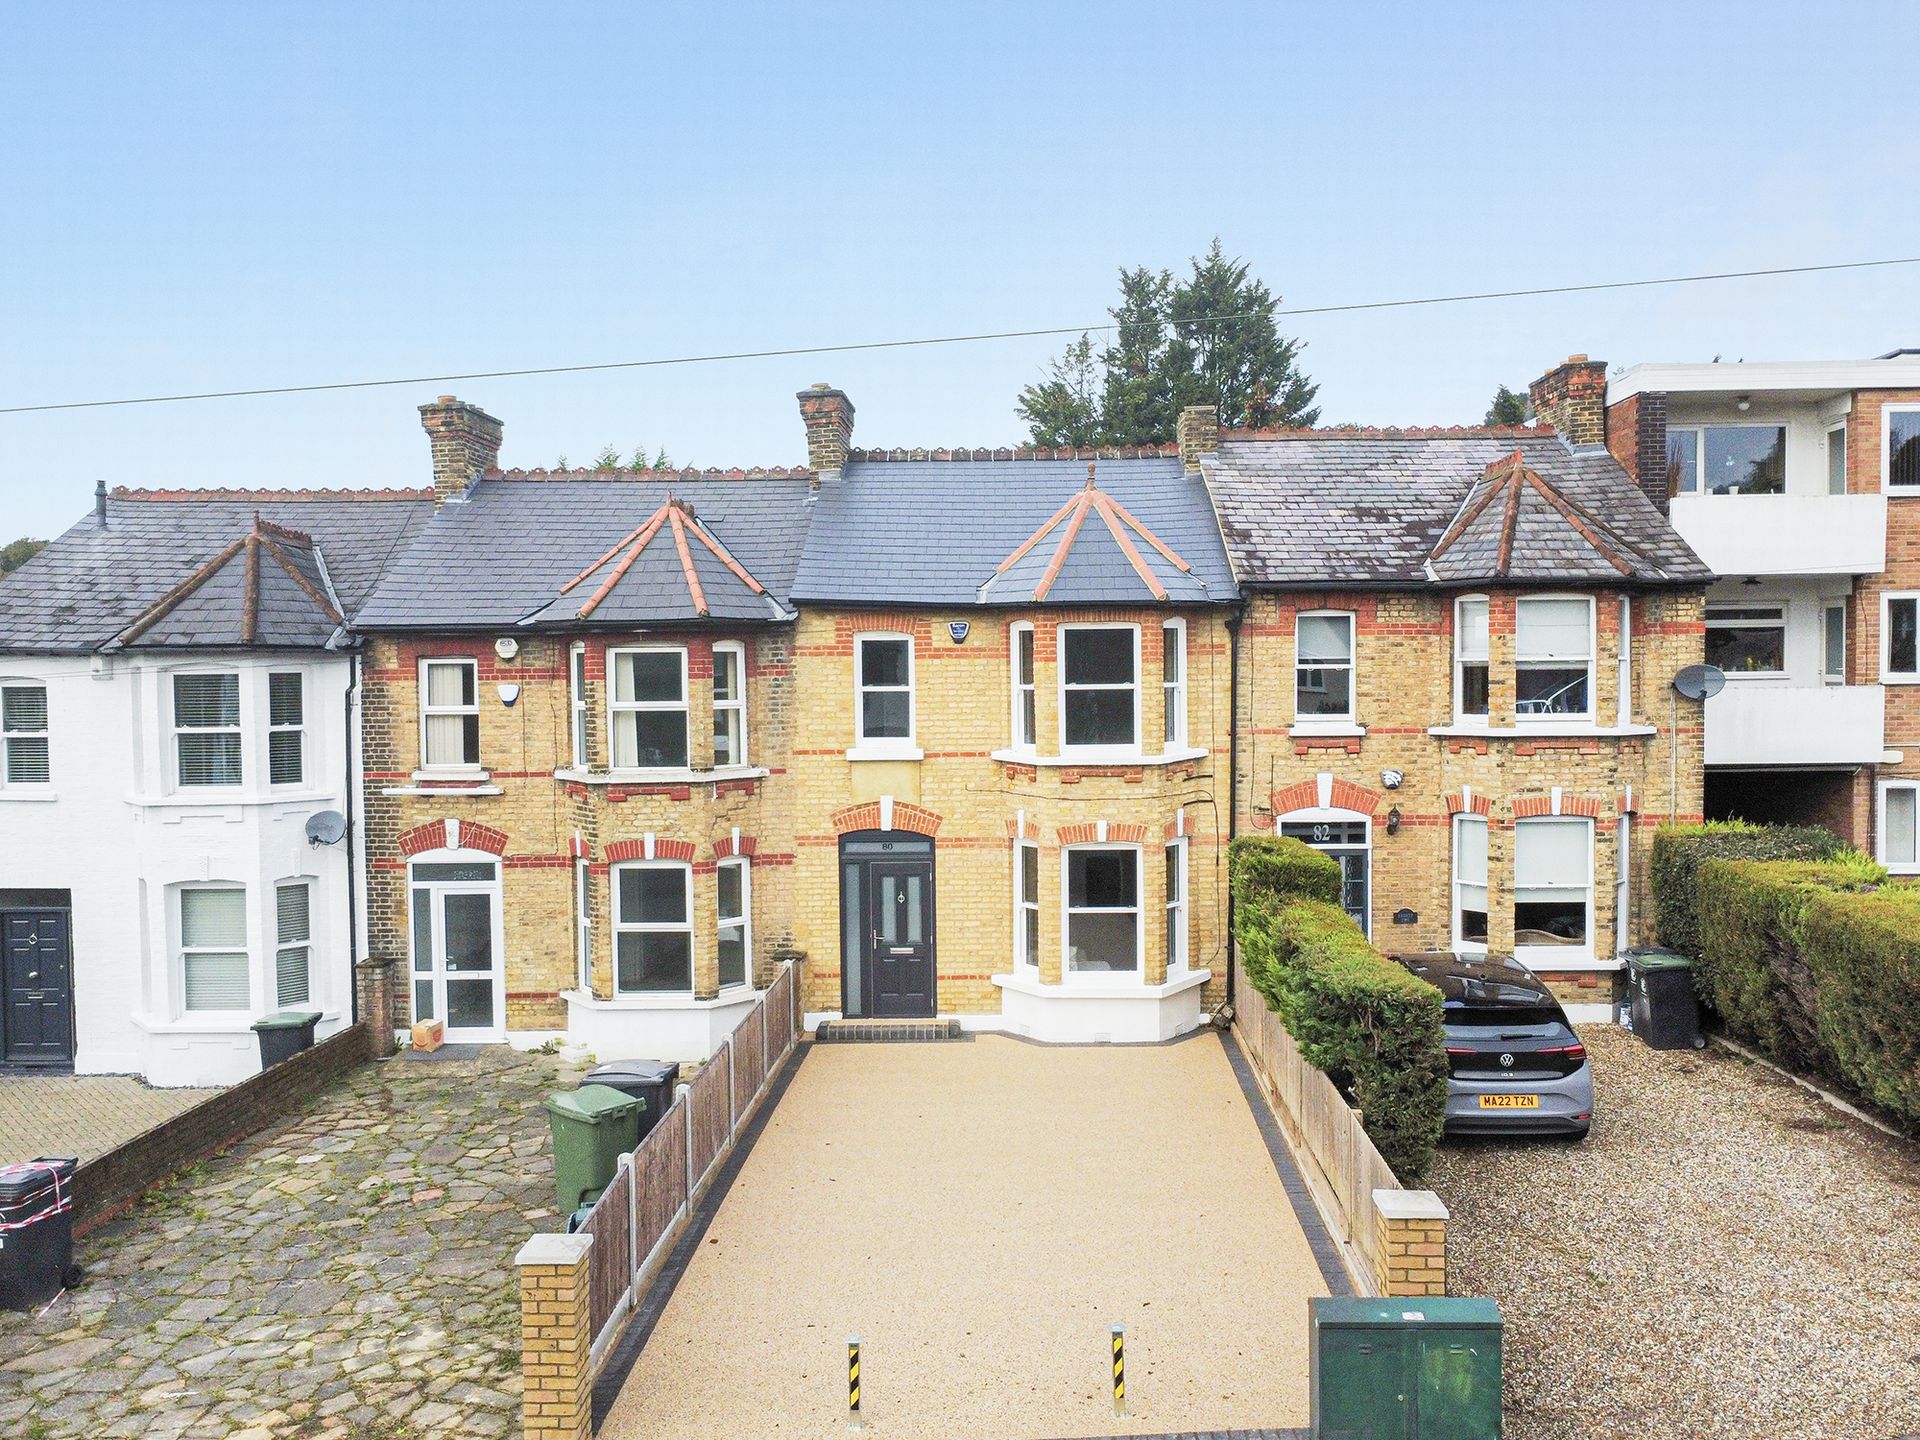 3 Bedroom House to rent in , Loughton, IG10